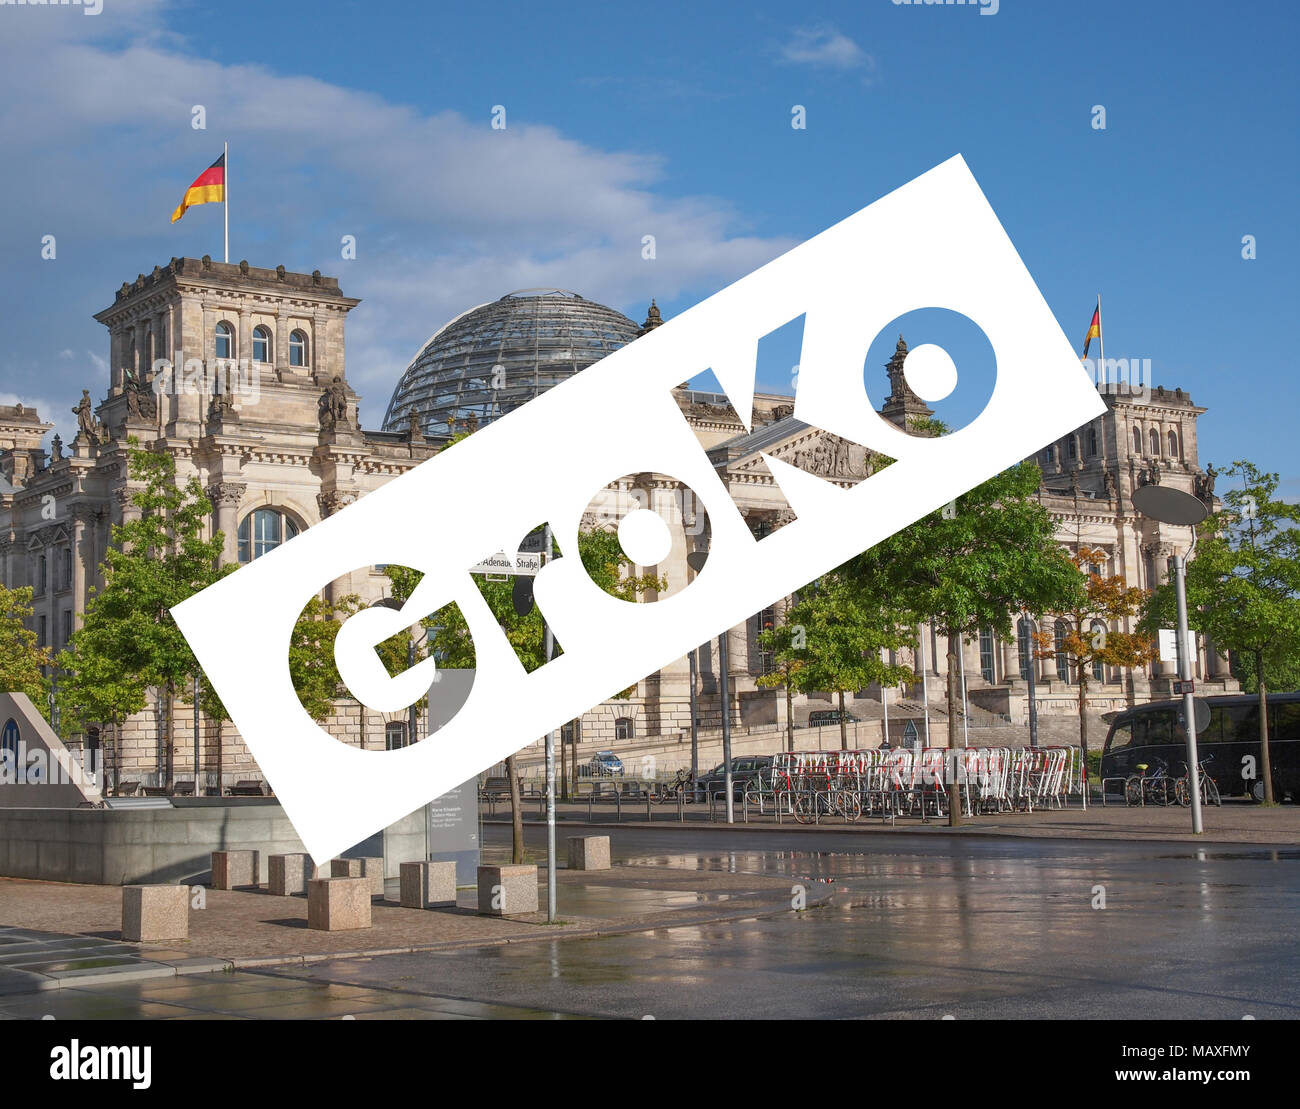 GroKo (short for Grosse Koalition, meaning Grand Coalition) superimposed to the Reichstag houses of parliament in Berlin, Germany Stock Photo